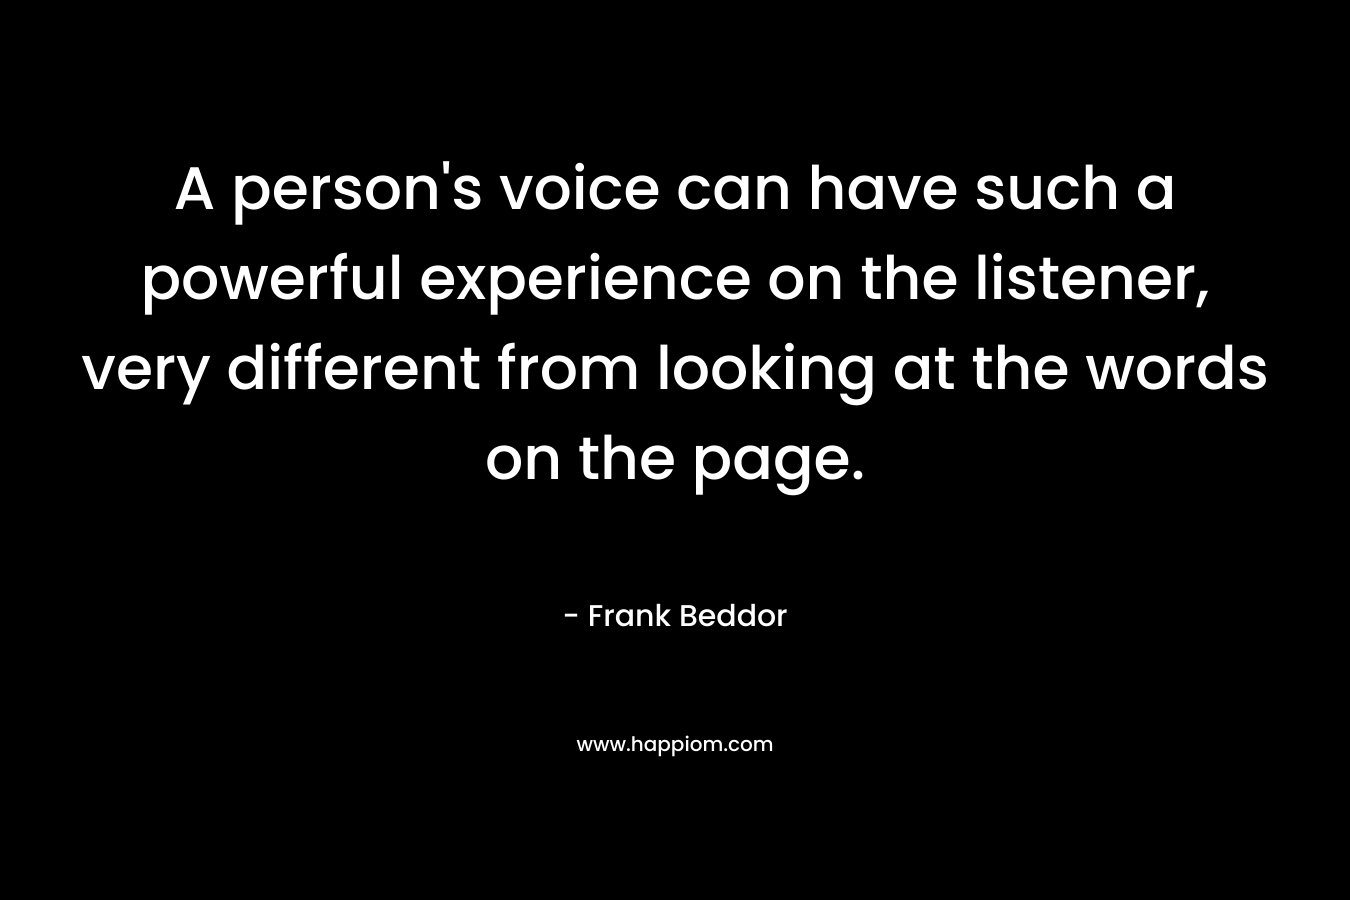 A person’s voice can have such a powerful experience on the listener, very different from looking at the words on the page. – Frank Beddor